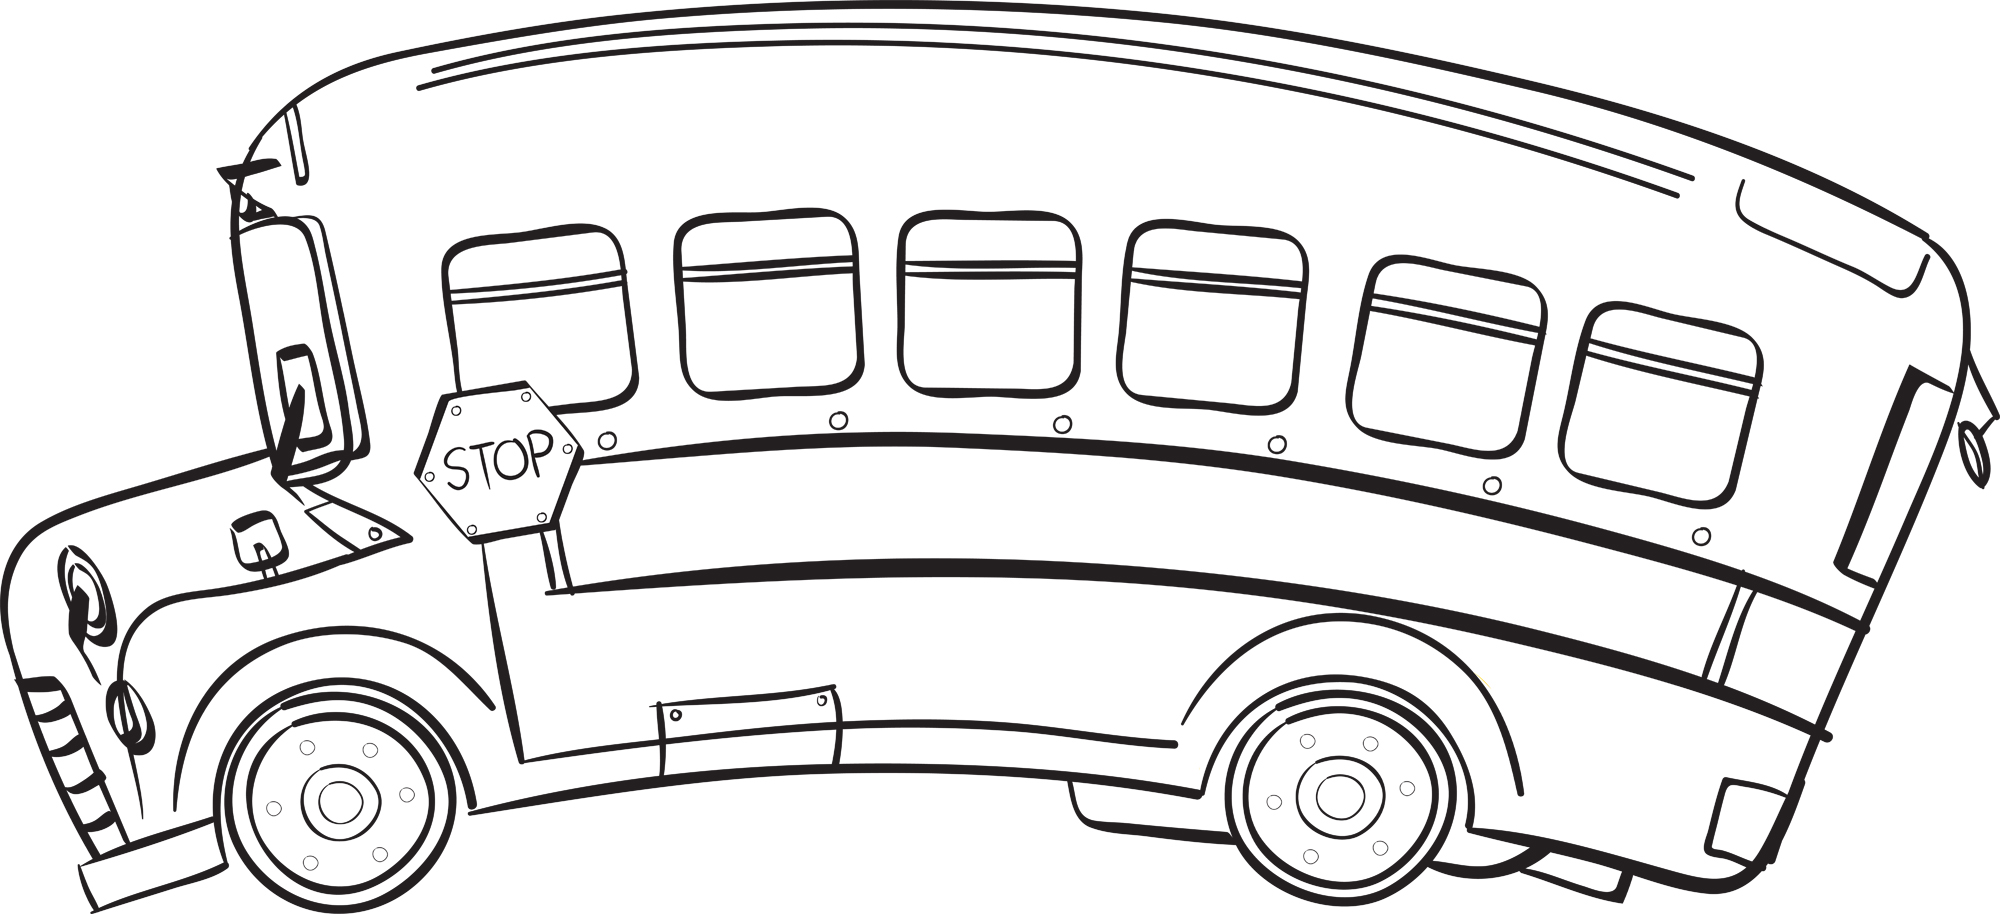 school bus clipart free black and white - photo #14